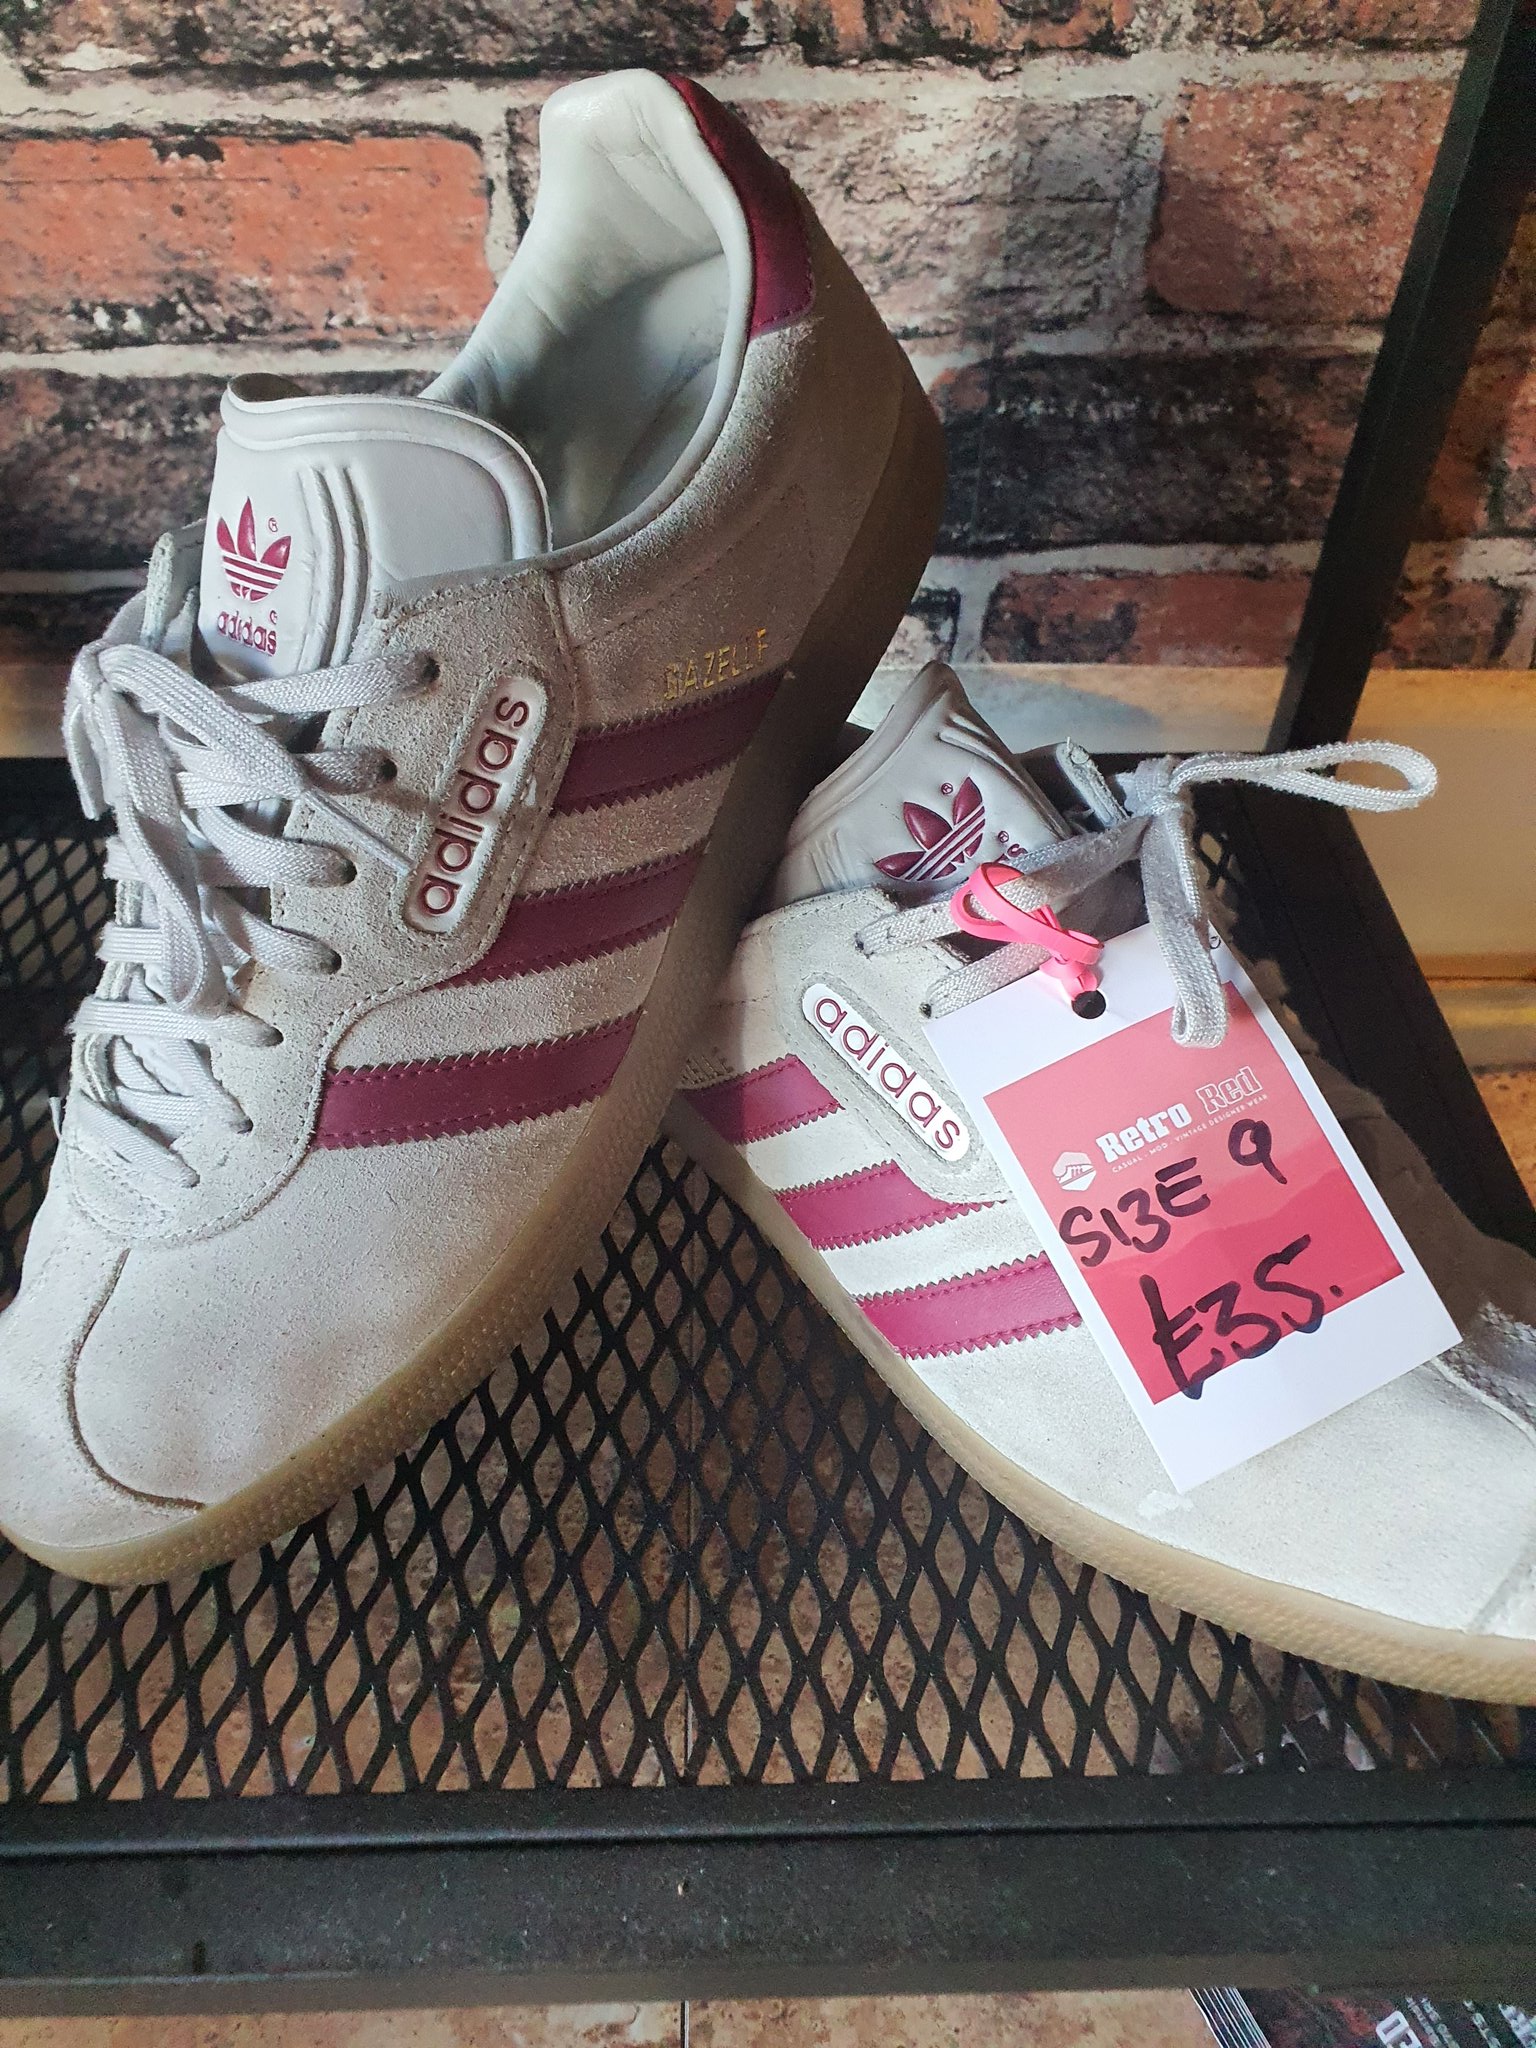 Retro Red Casuals Ltd on Twitter: "Adidas Gazelle Size 9 need a freshen up but well wearable Box but will come boxed £35.00 posted https://t.co/iFQhXRhkyO" / Twitter